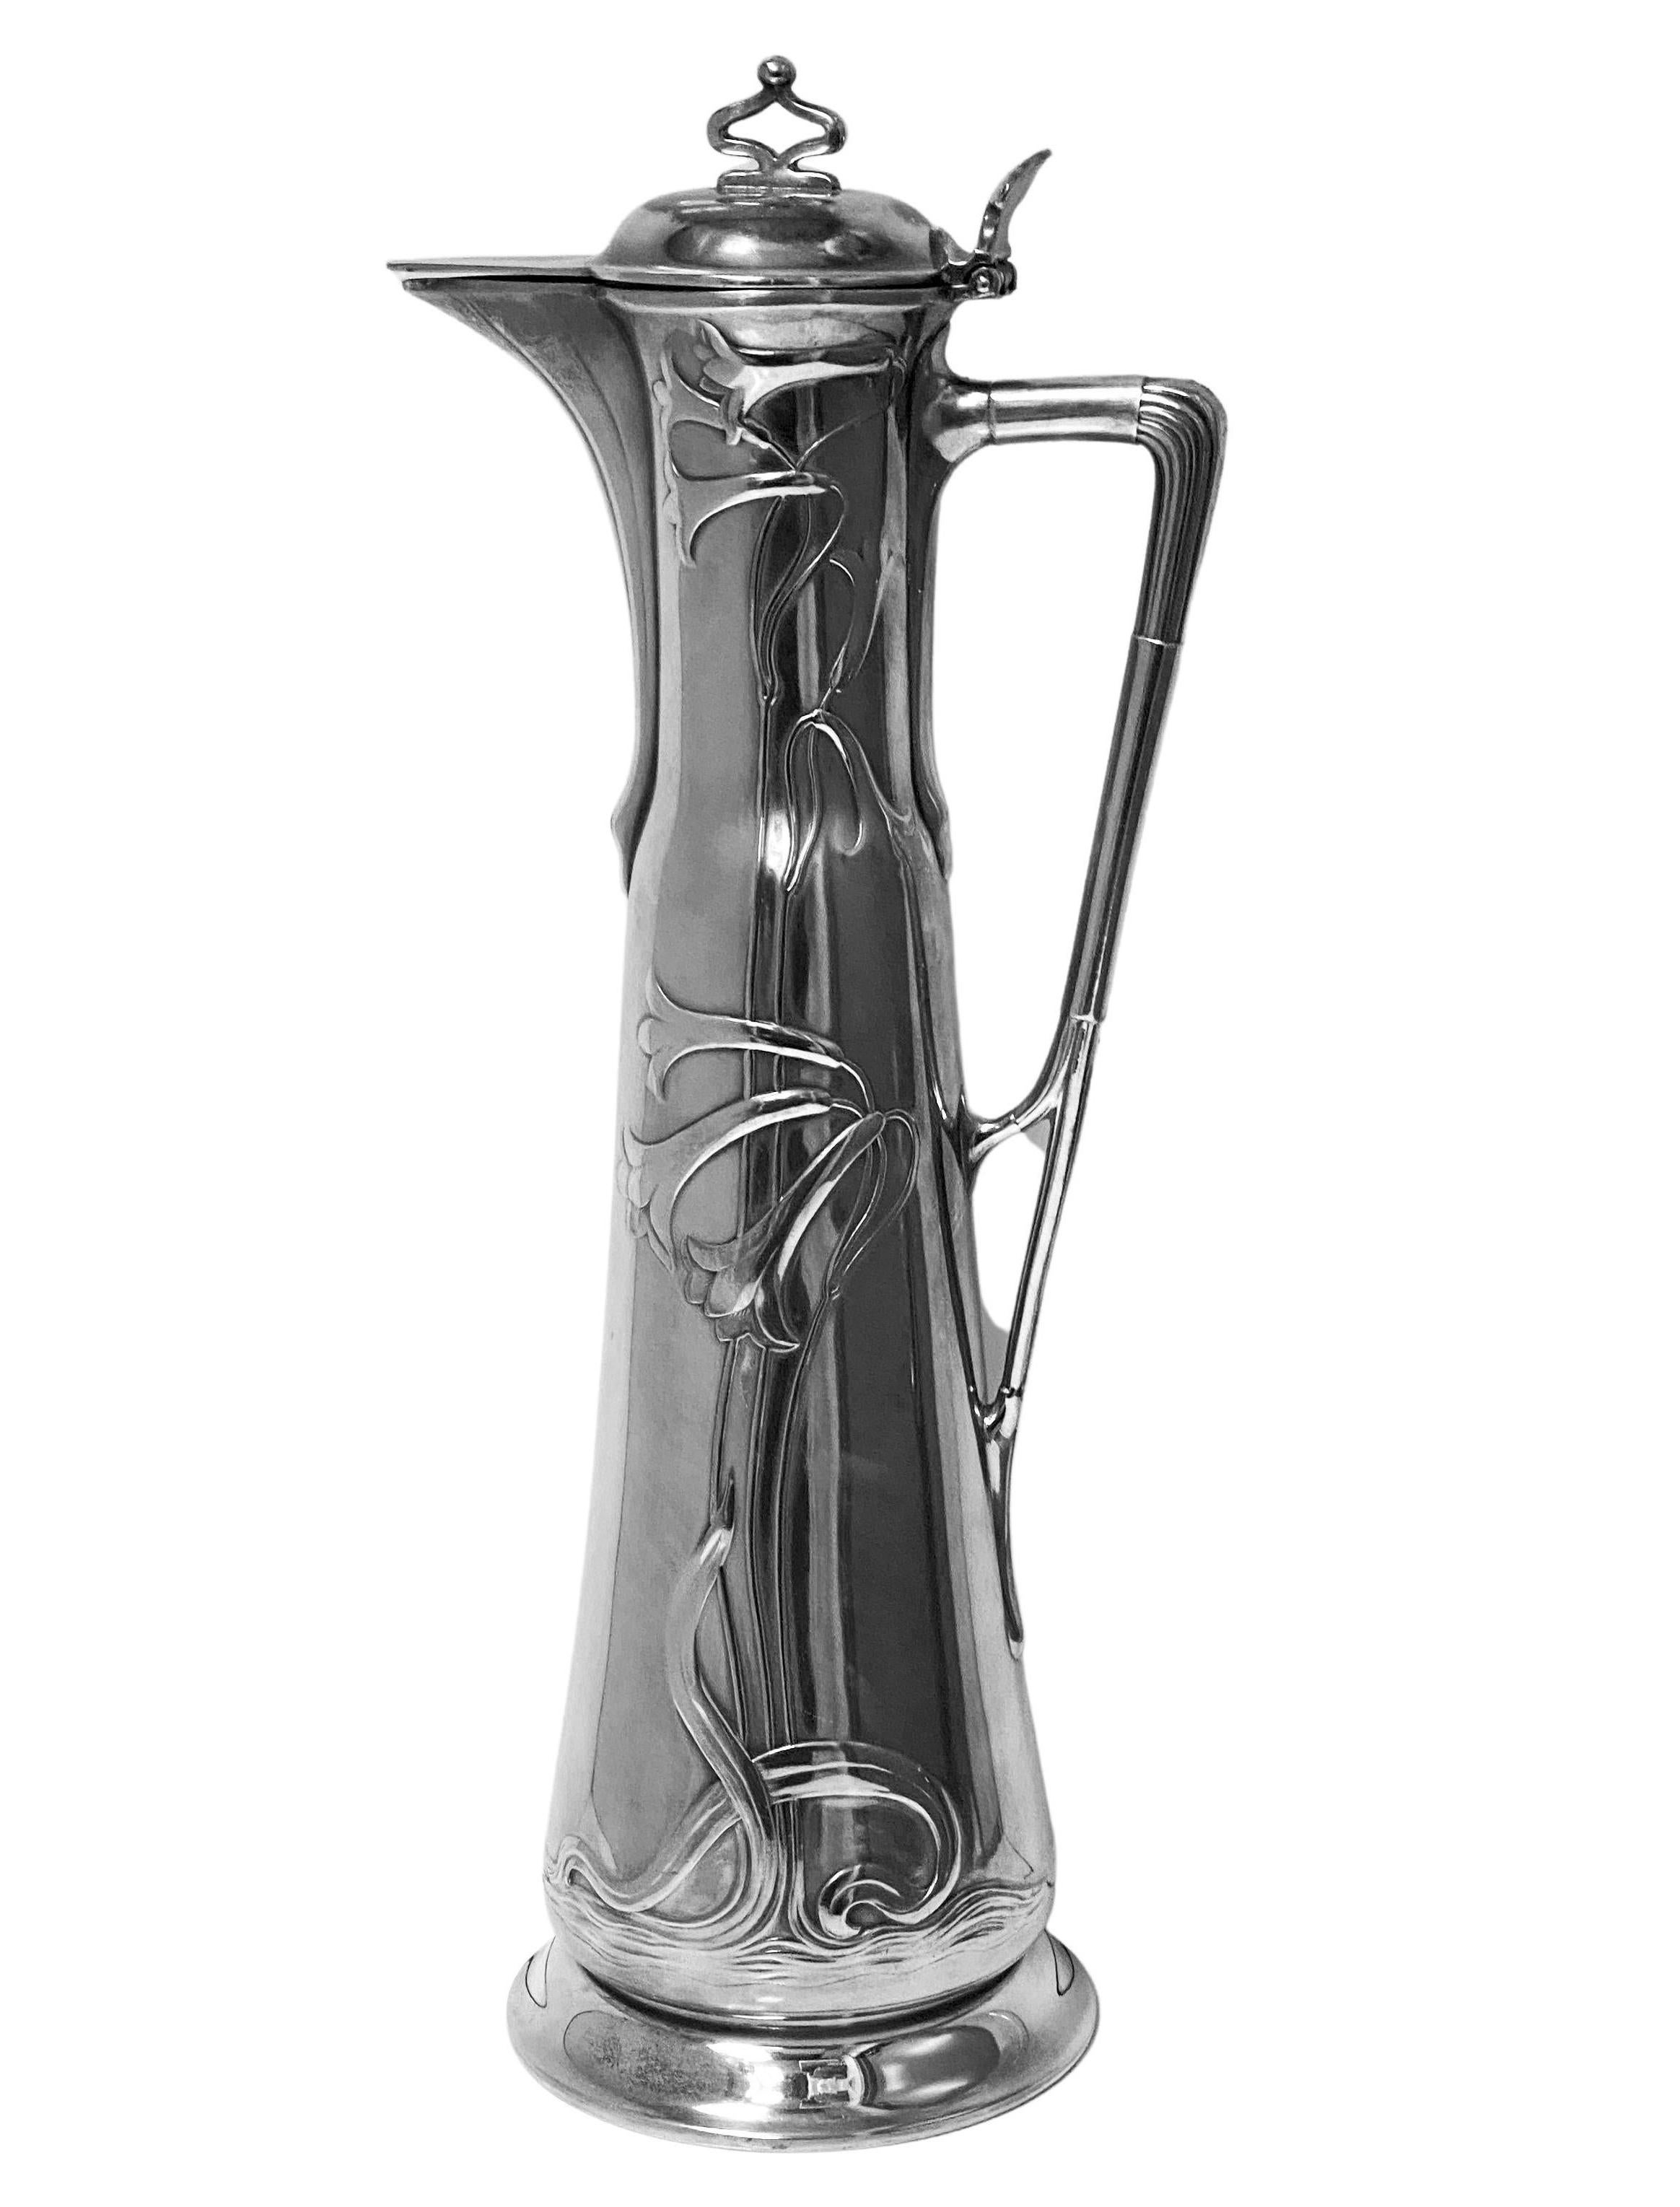 WMF Art Nouveau Jugendstil Pewter Claret Wine Jug C.1900. Large tapering body decorated with stylised foliate relief, with hinged lid and stylised handle stamped WMF O/1 to base. Height: 14.50 inches. Width: 6 inches. Condition: very slight wear to